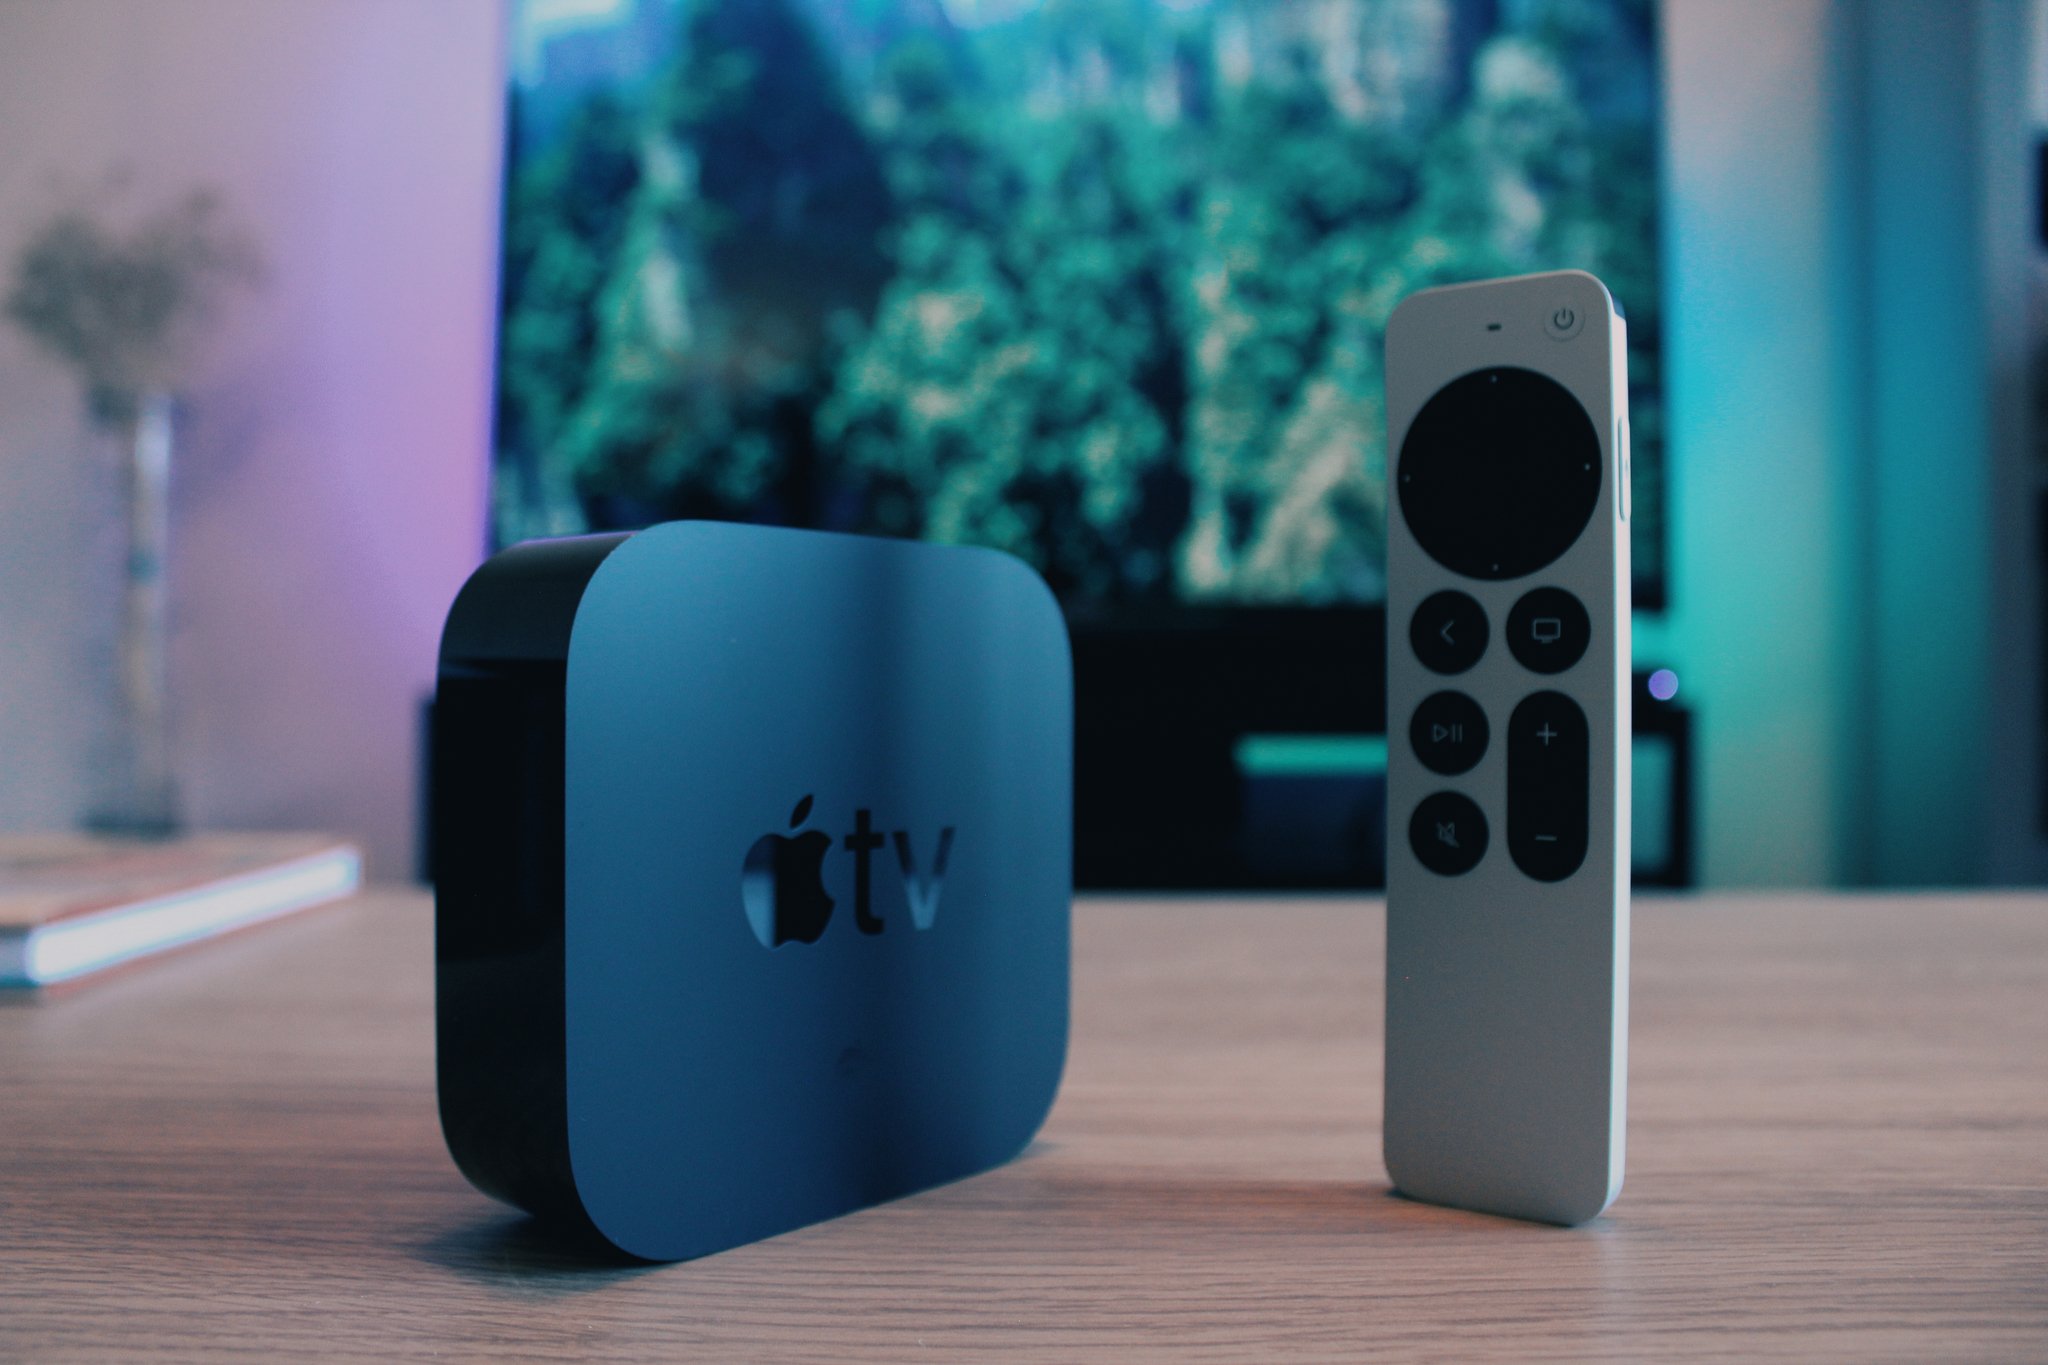 Here's everything you need to know to update your Apple TV